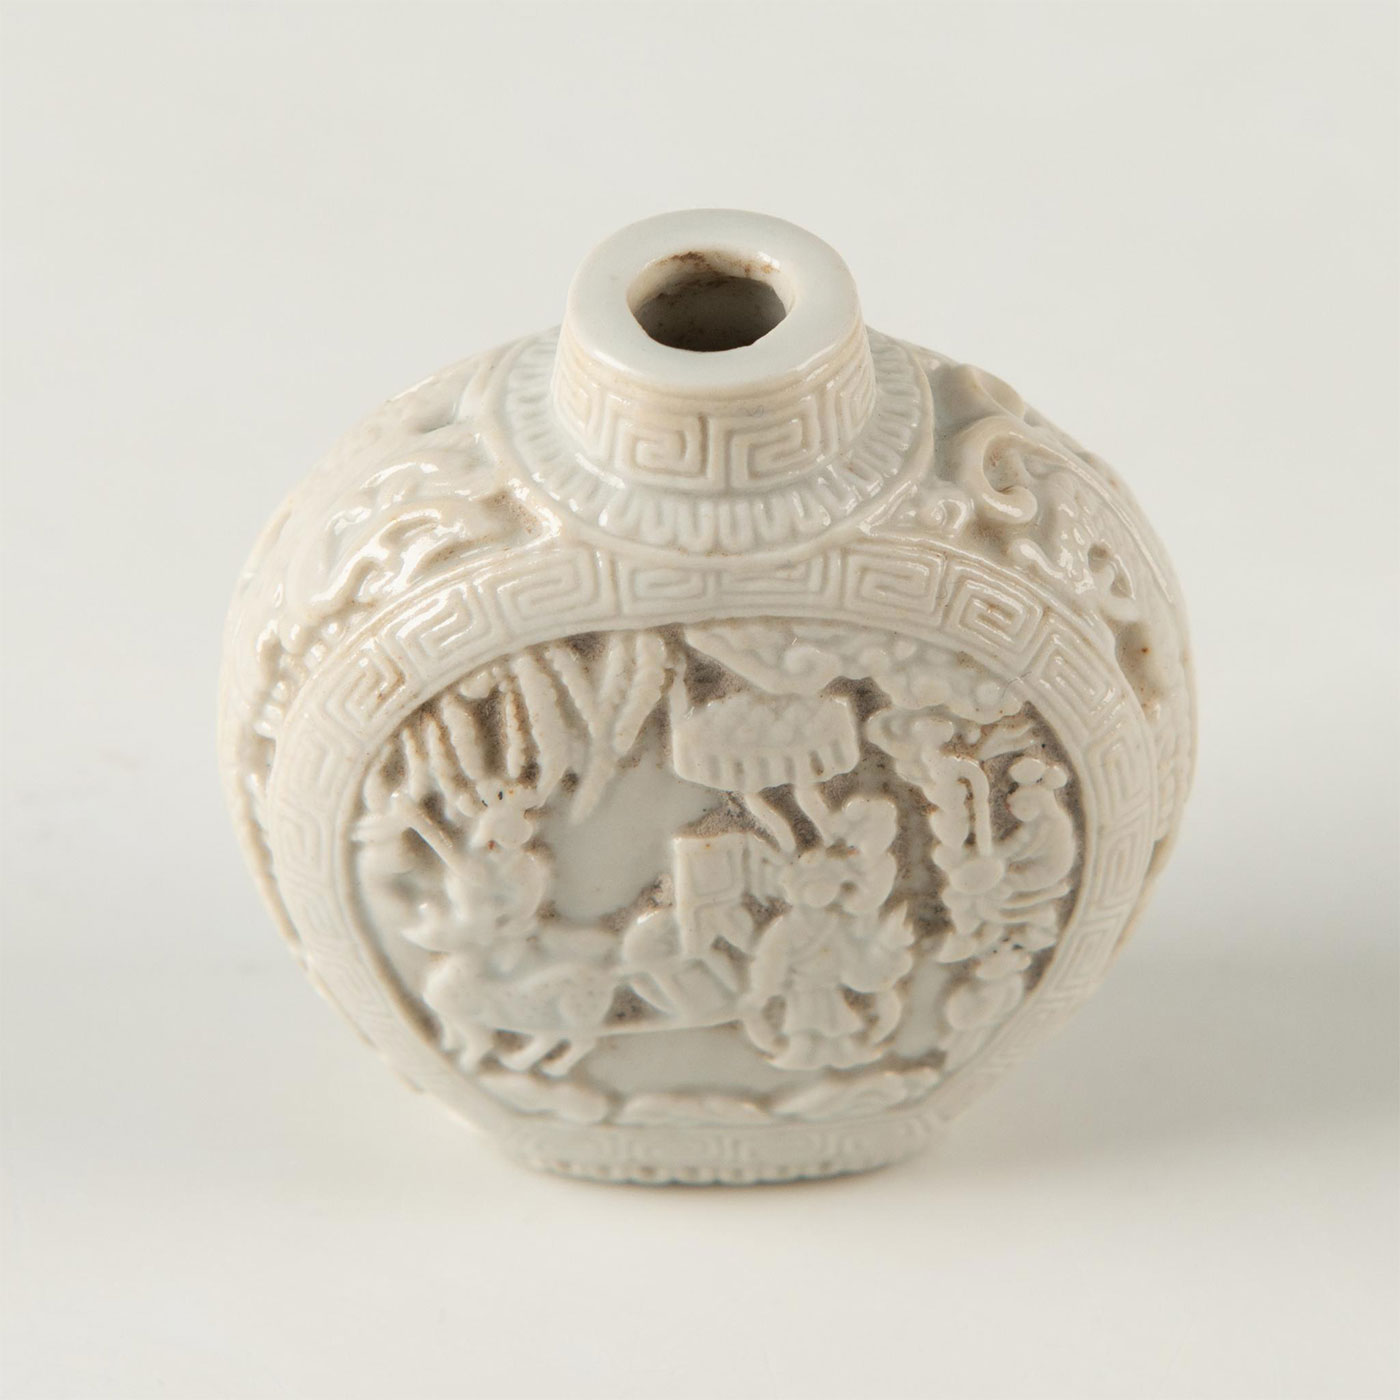 CHINESE LATE QING DYNASTY WHITE PORCELAIN SNUFF BOTTLE - Image 2 of 6